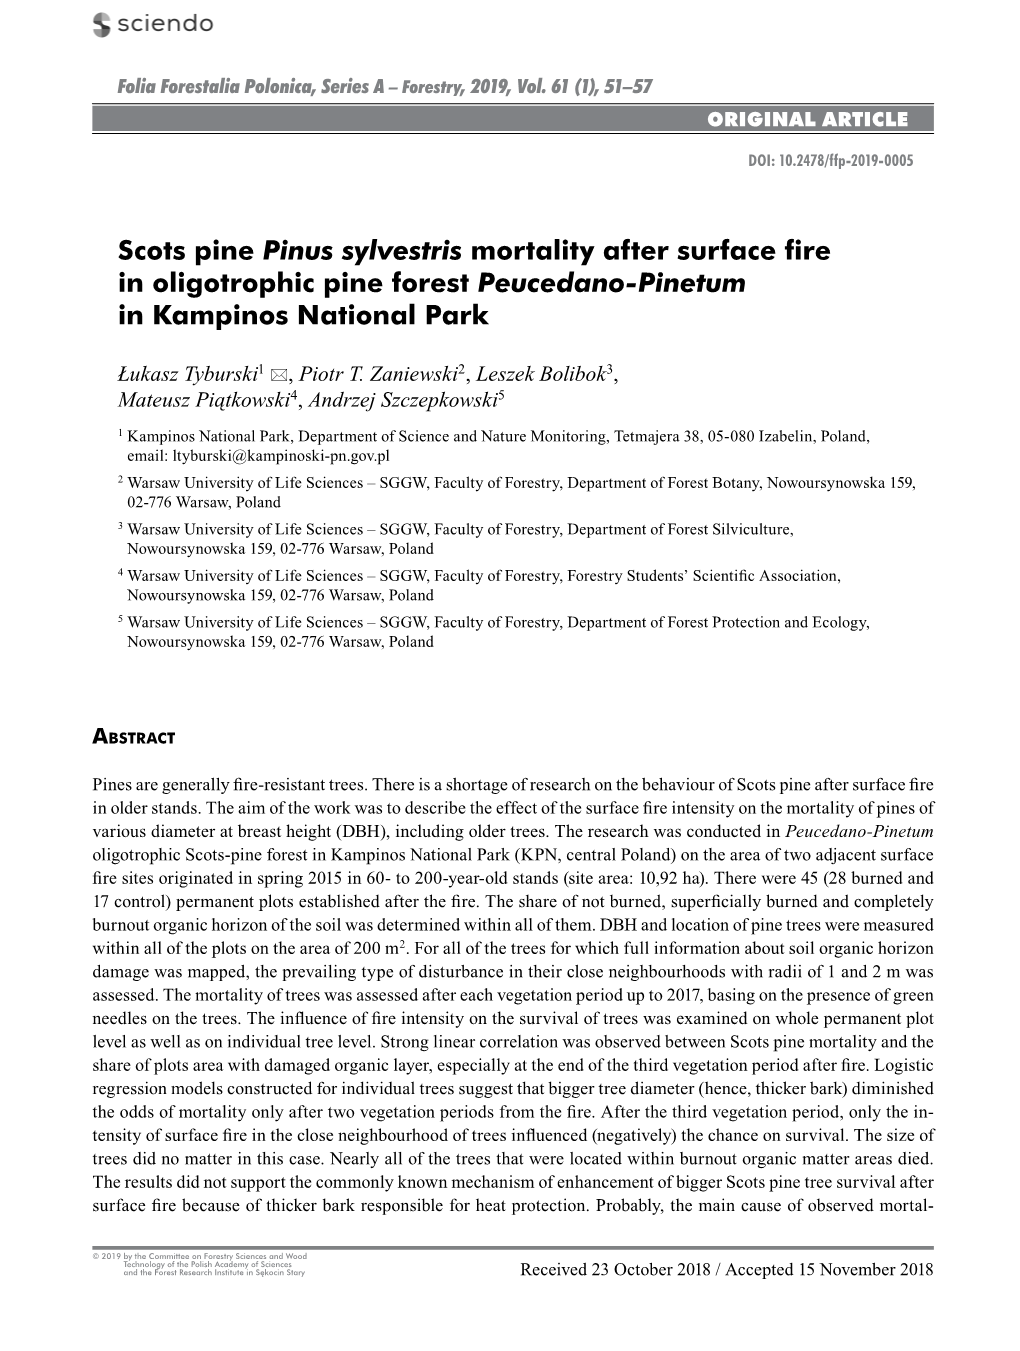 Scots Pine Pinus Sylvestris Mortality After Surface Fire in Oligotrophic Pine Forest Peucedano-Pinetum in Kampinos National Park